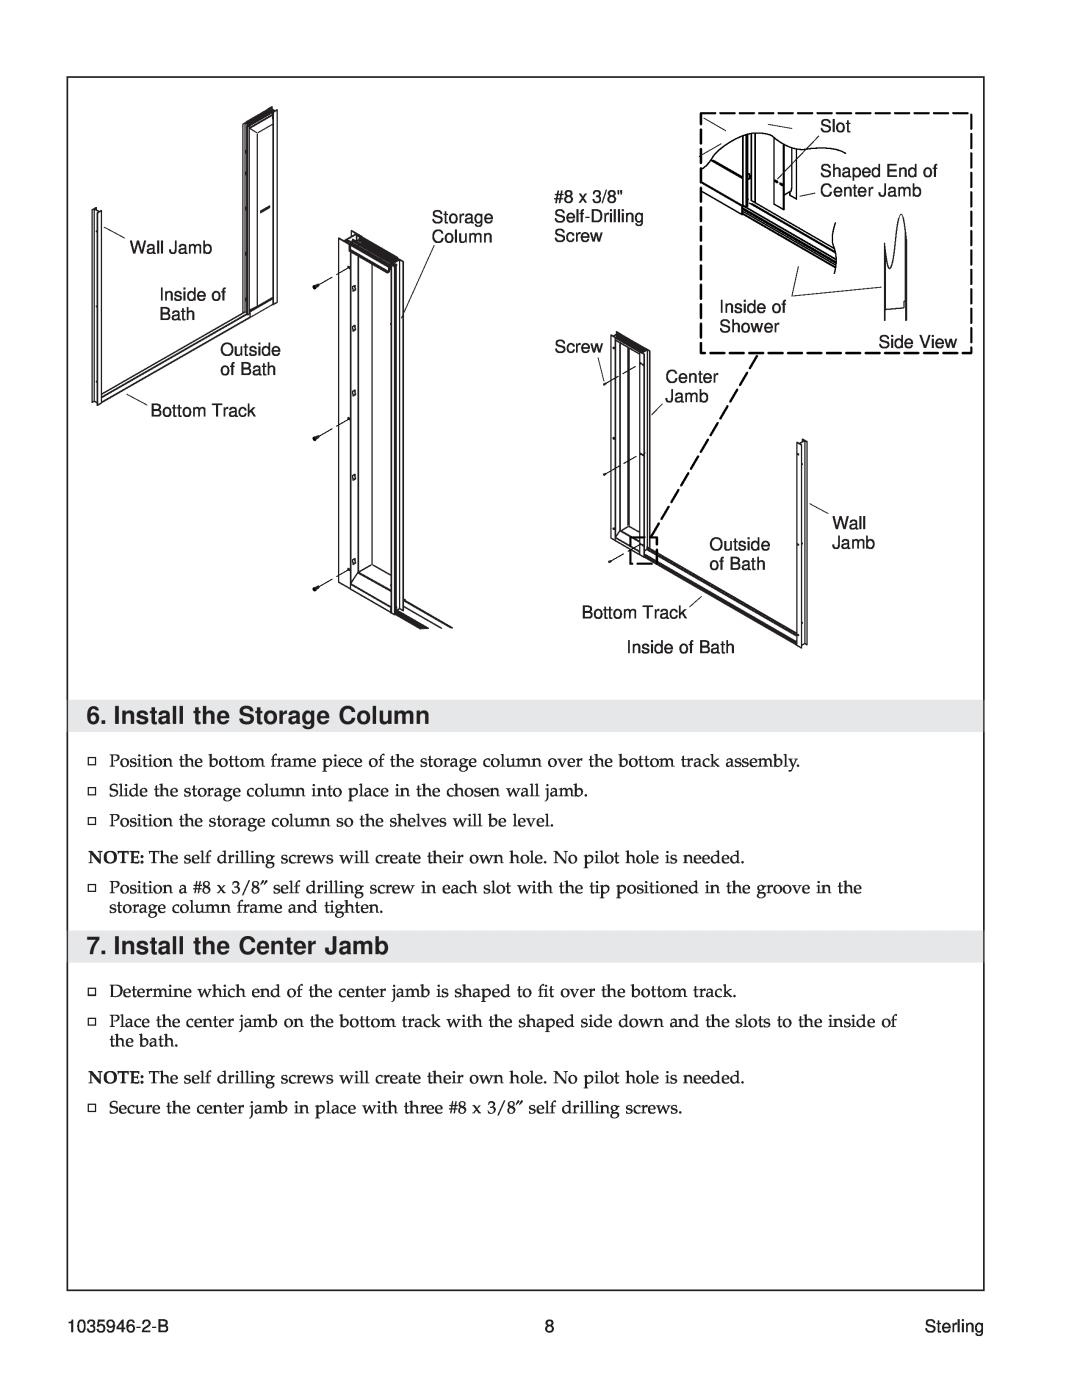 Sterling Plumbing 6075, 6065 manual Install the Storage Column, Install the Center Jamb 